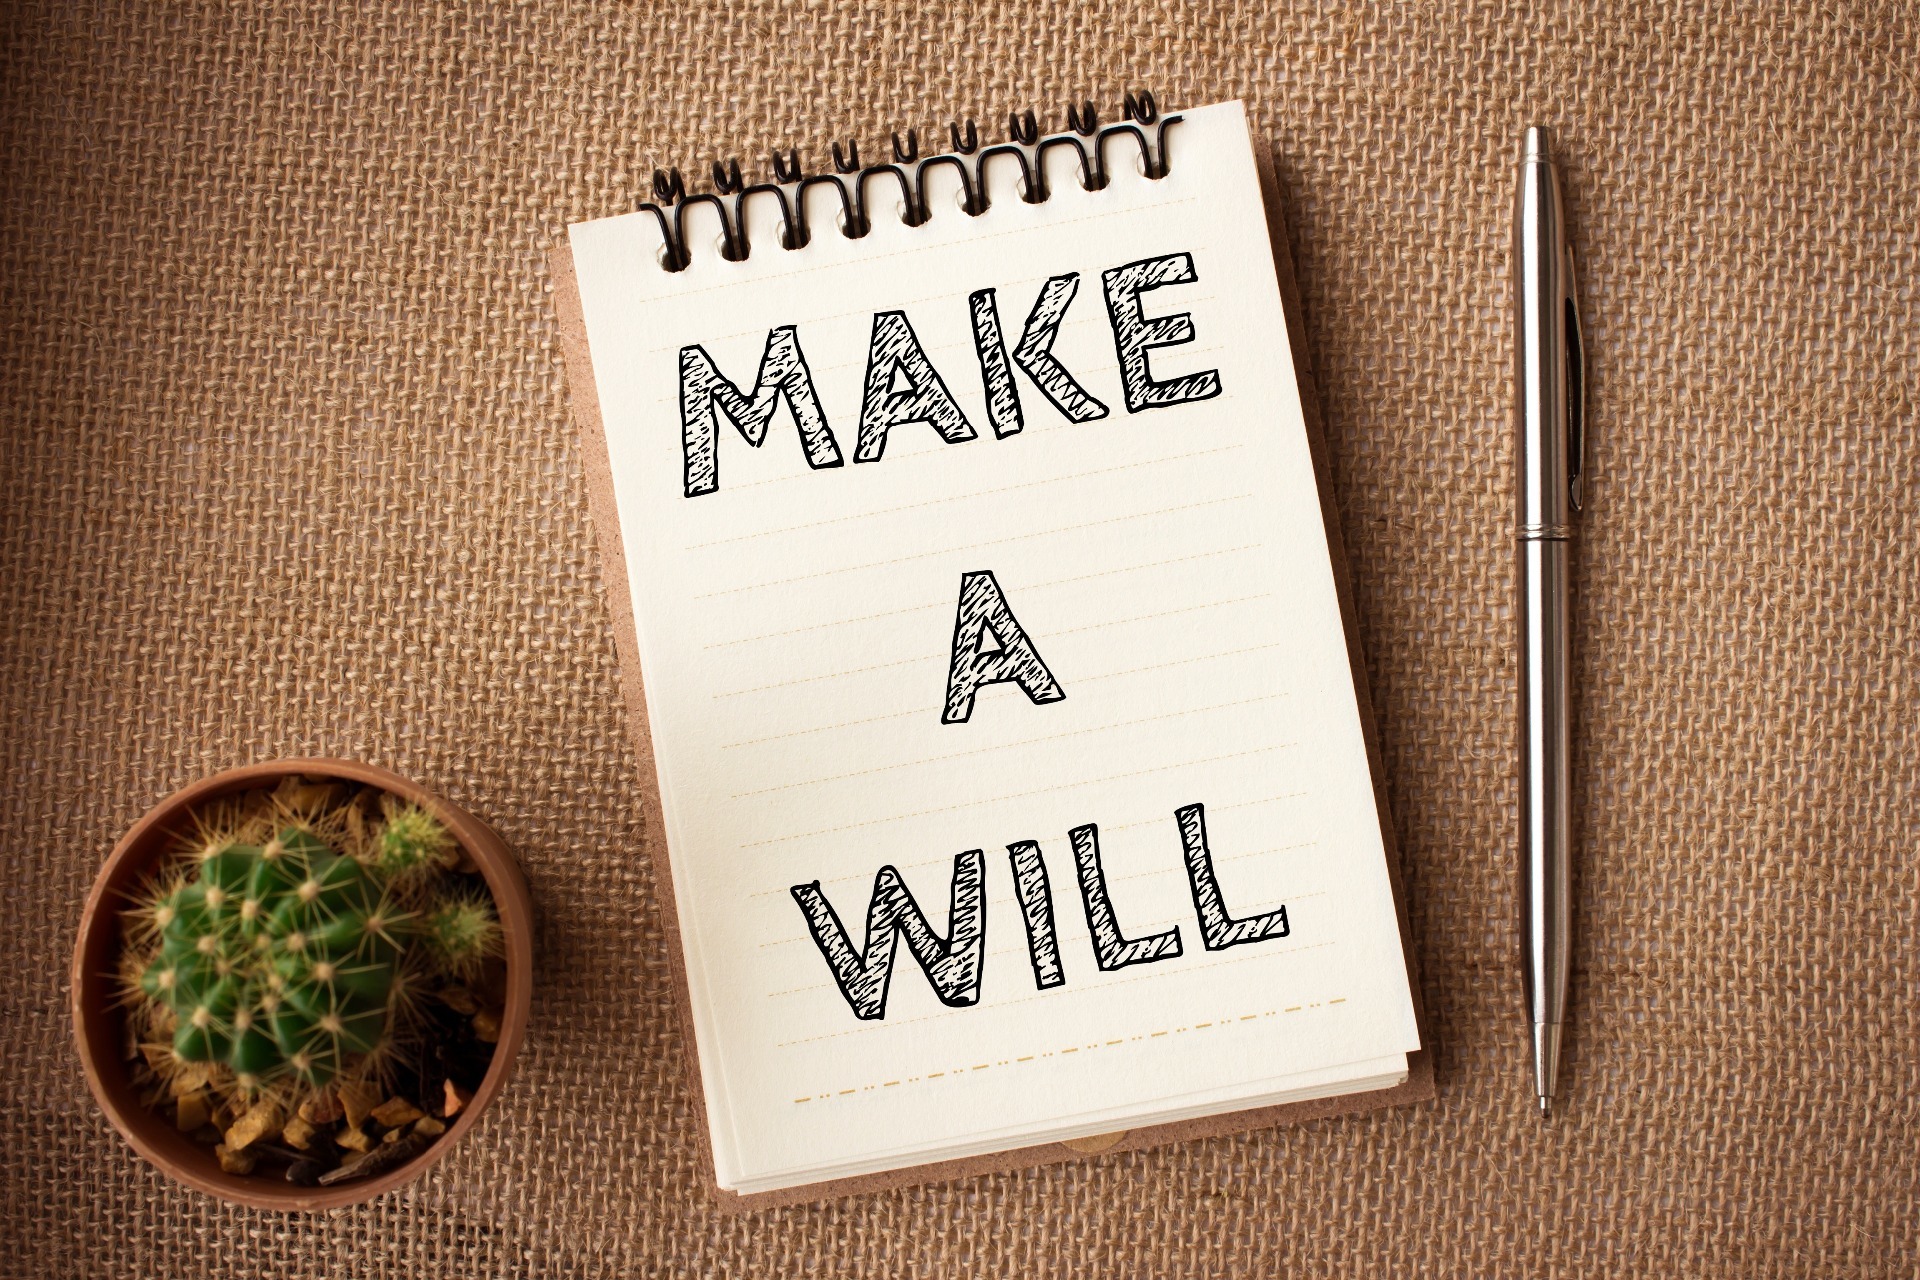 A notepad with "Make a Will" written on; our Wills Solicitors in Lytham can assist with Will drafting from £175 plus VAT.  Follow this link to visit our Wills page, or fill out the Contact Us form and a Wills Solicitor will be in touch within 1 working hour.